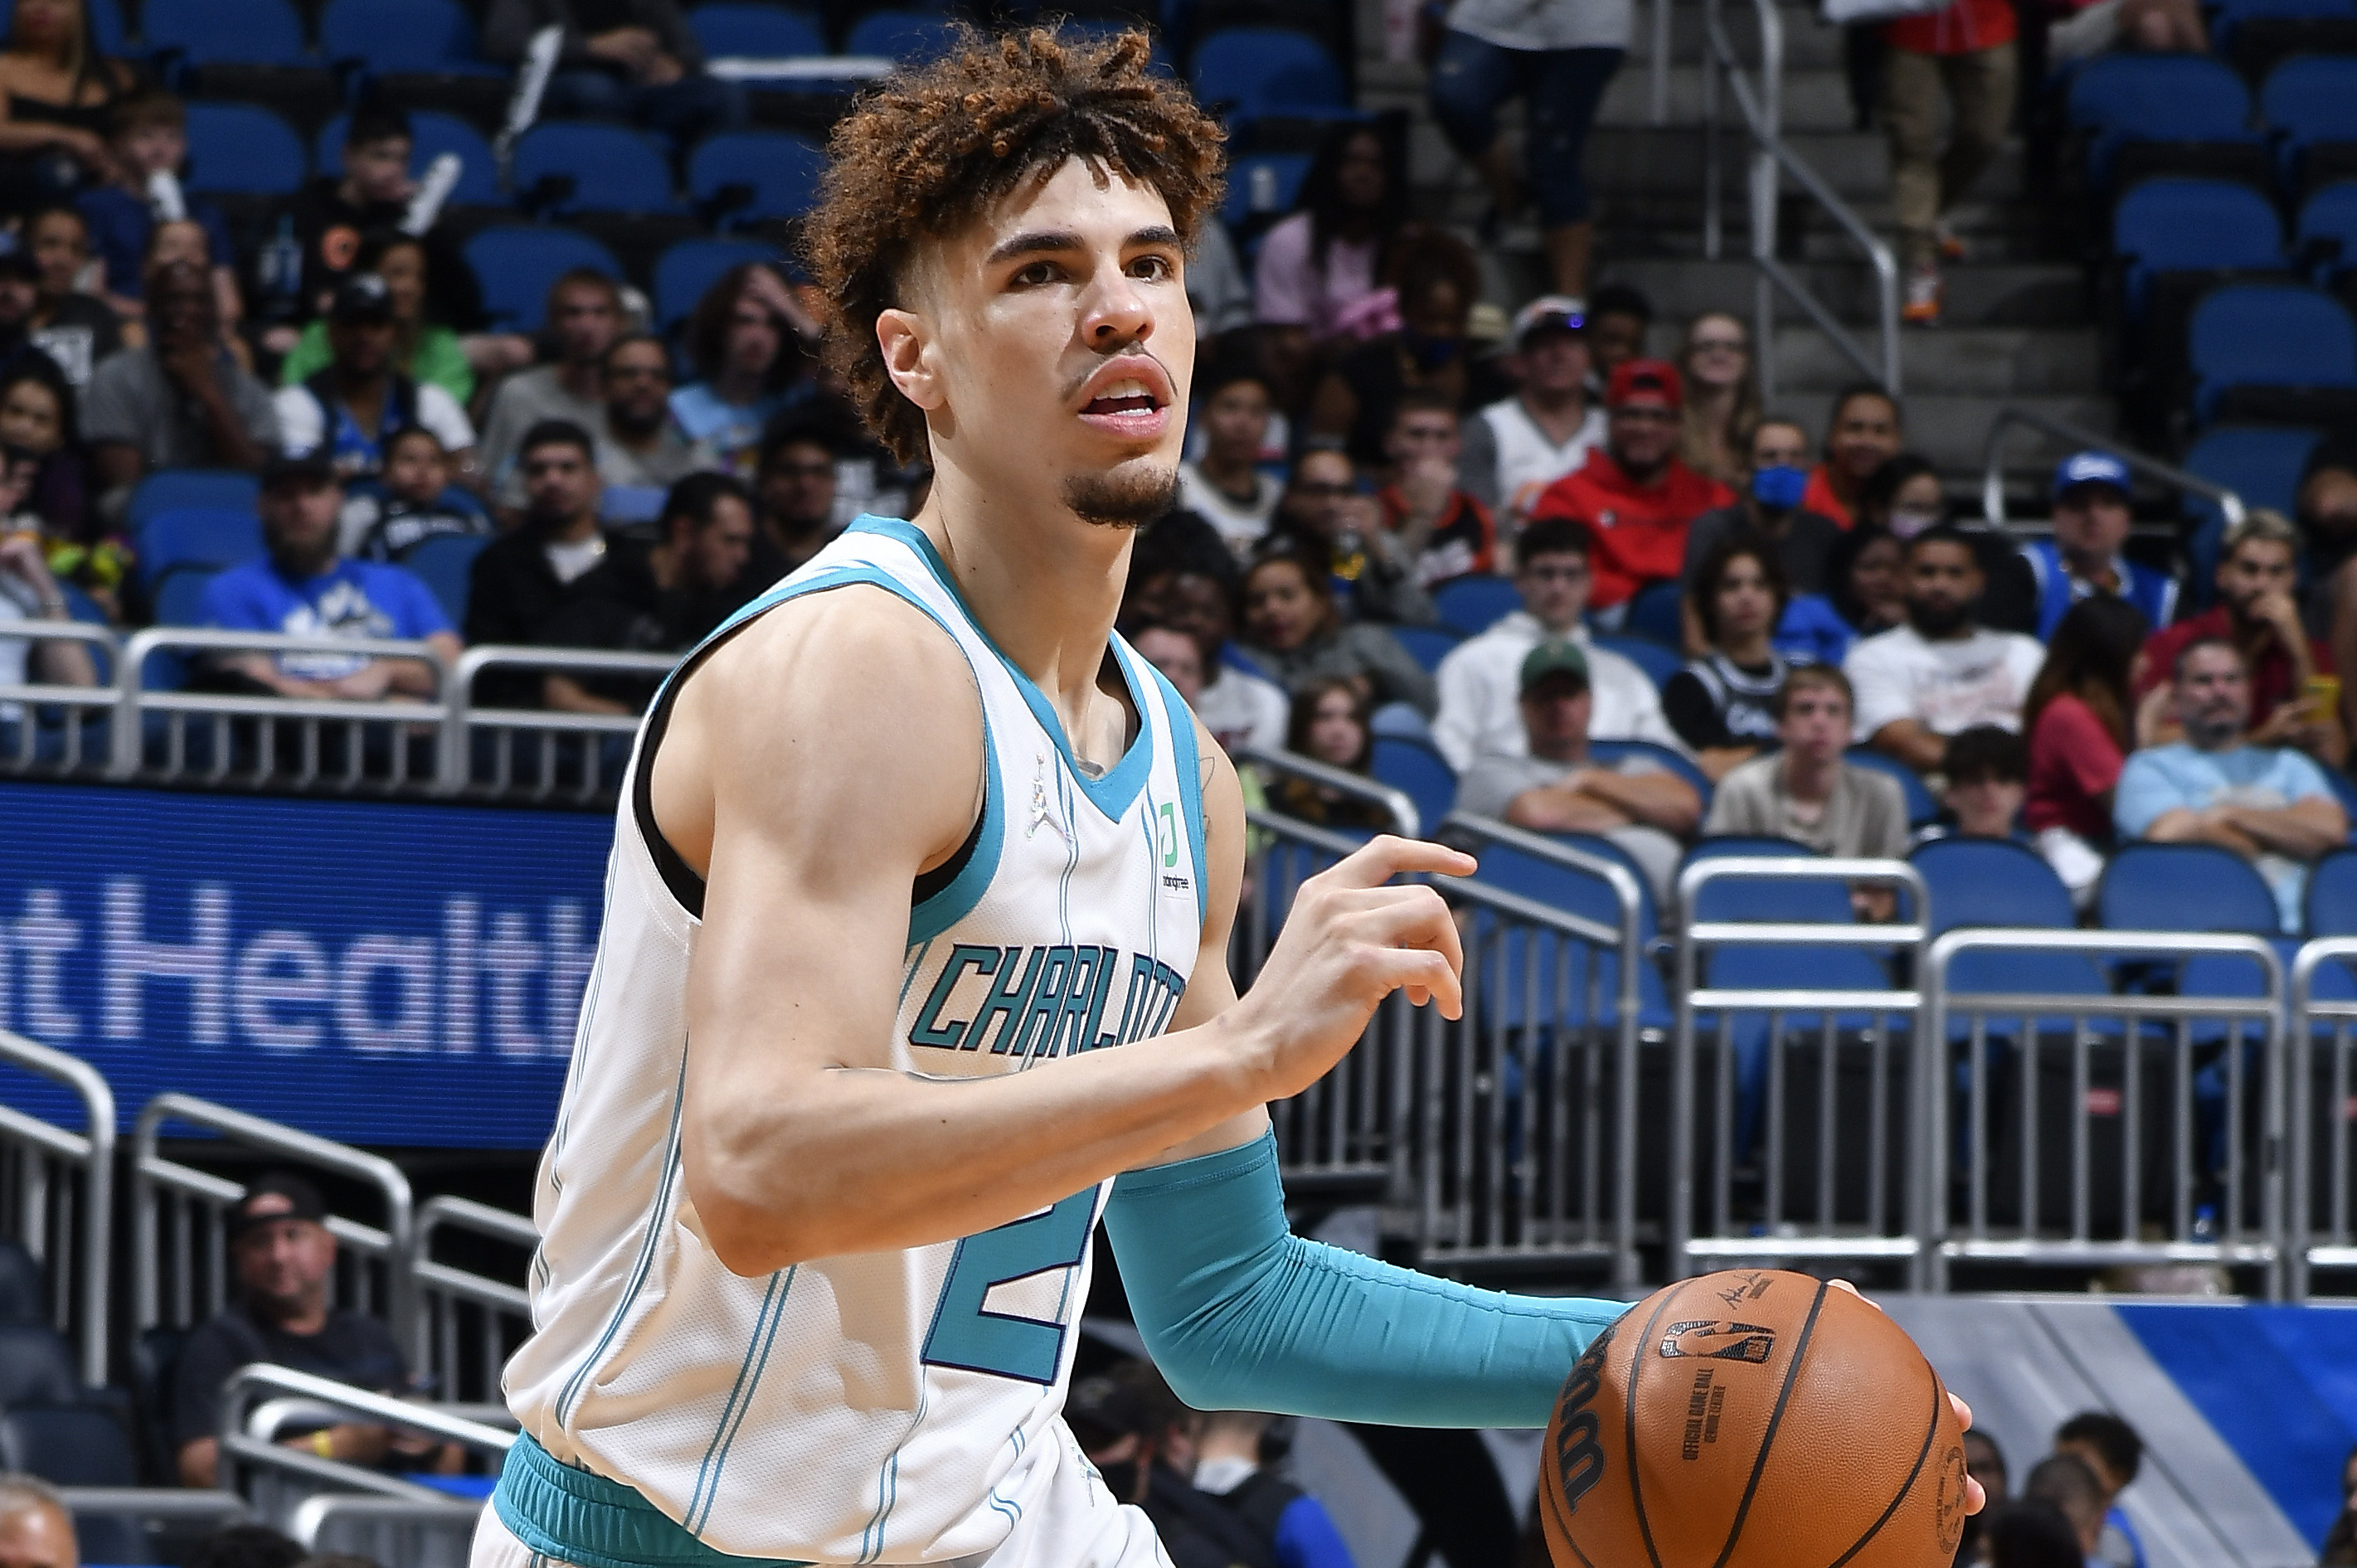 LaMelo Ball set to receive rookie max extension in 2023 per reports